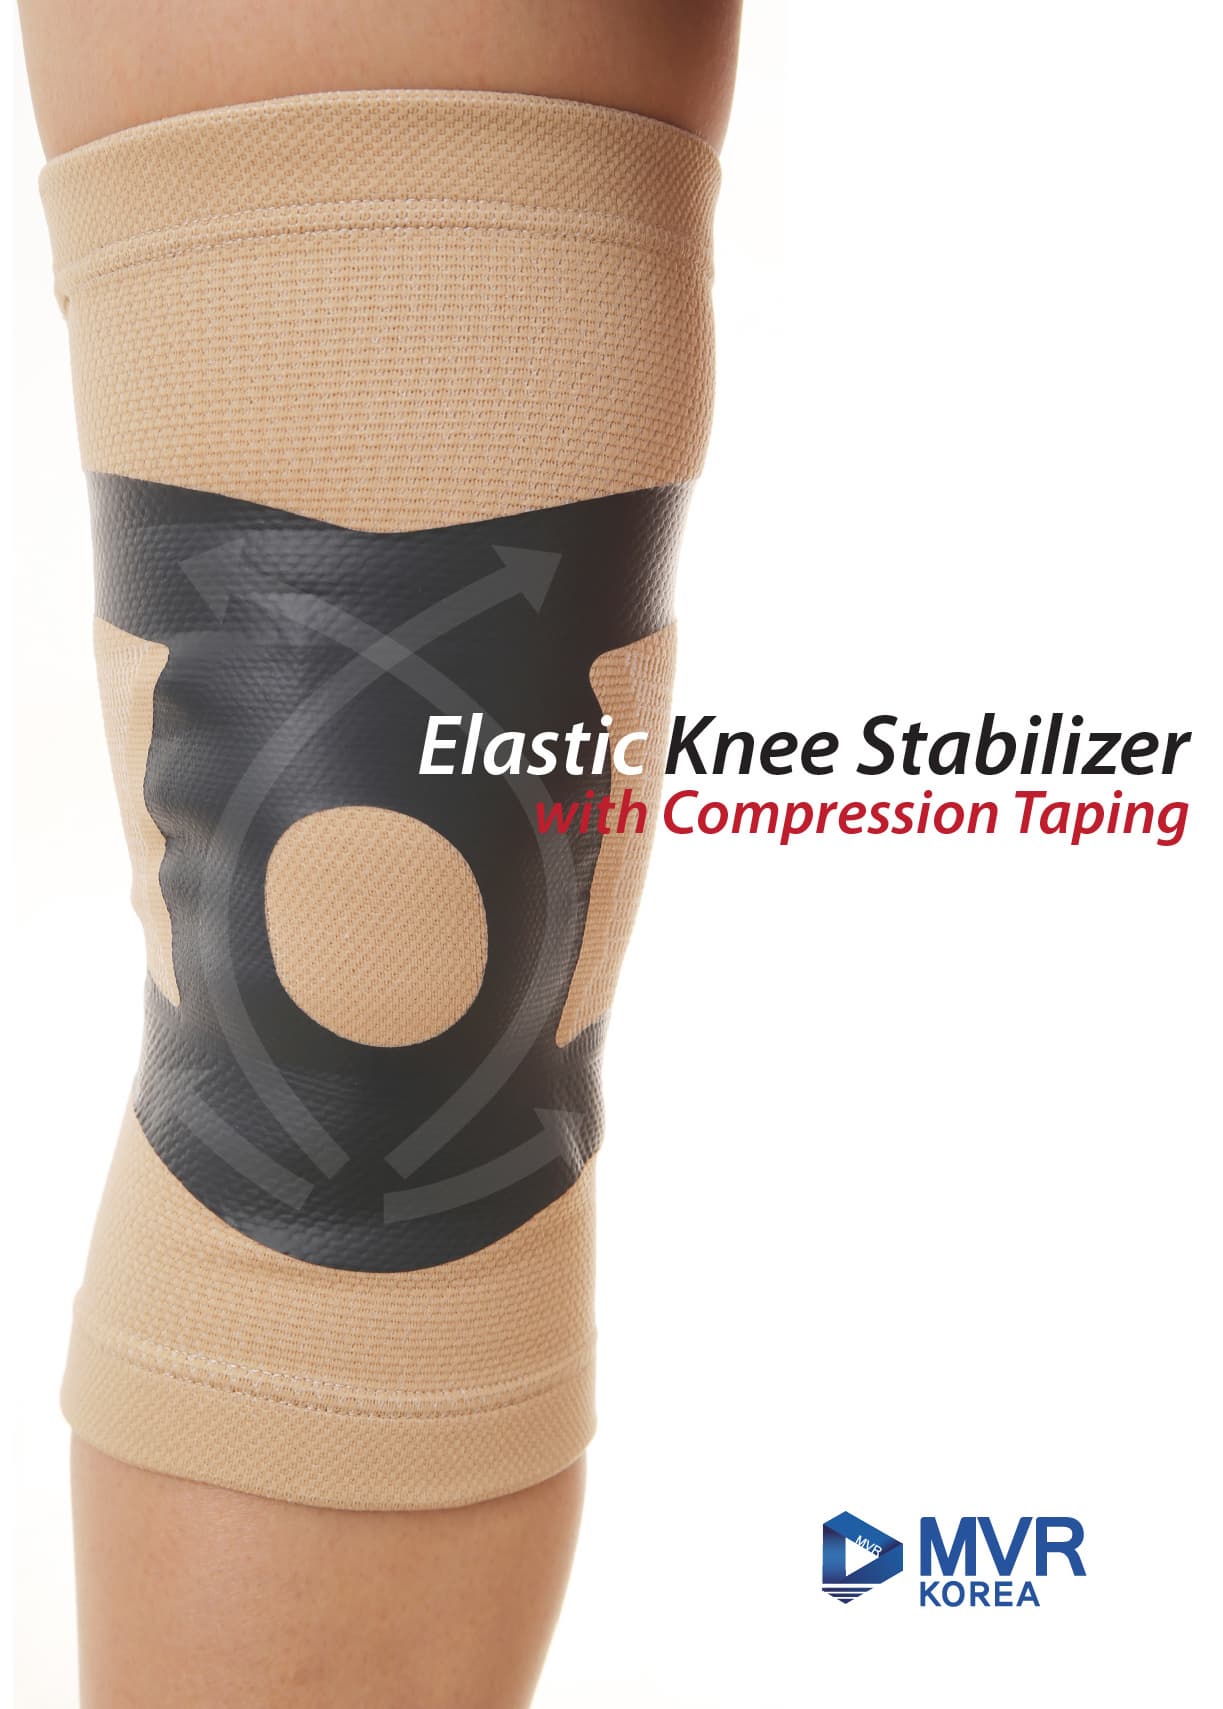 Elastic Knee Stabilizer with Compression Taping